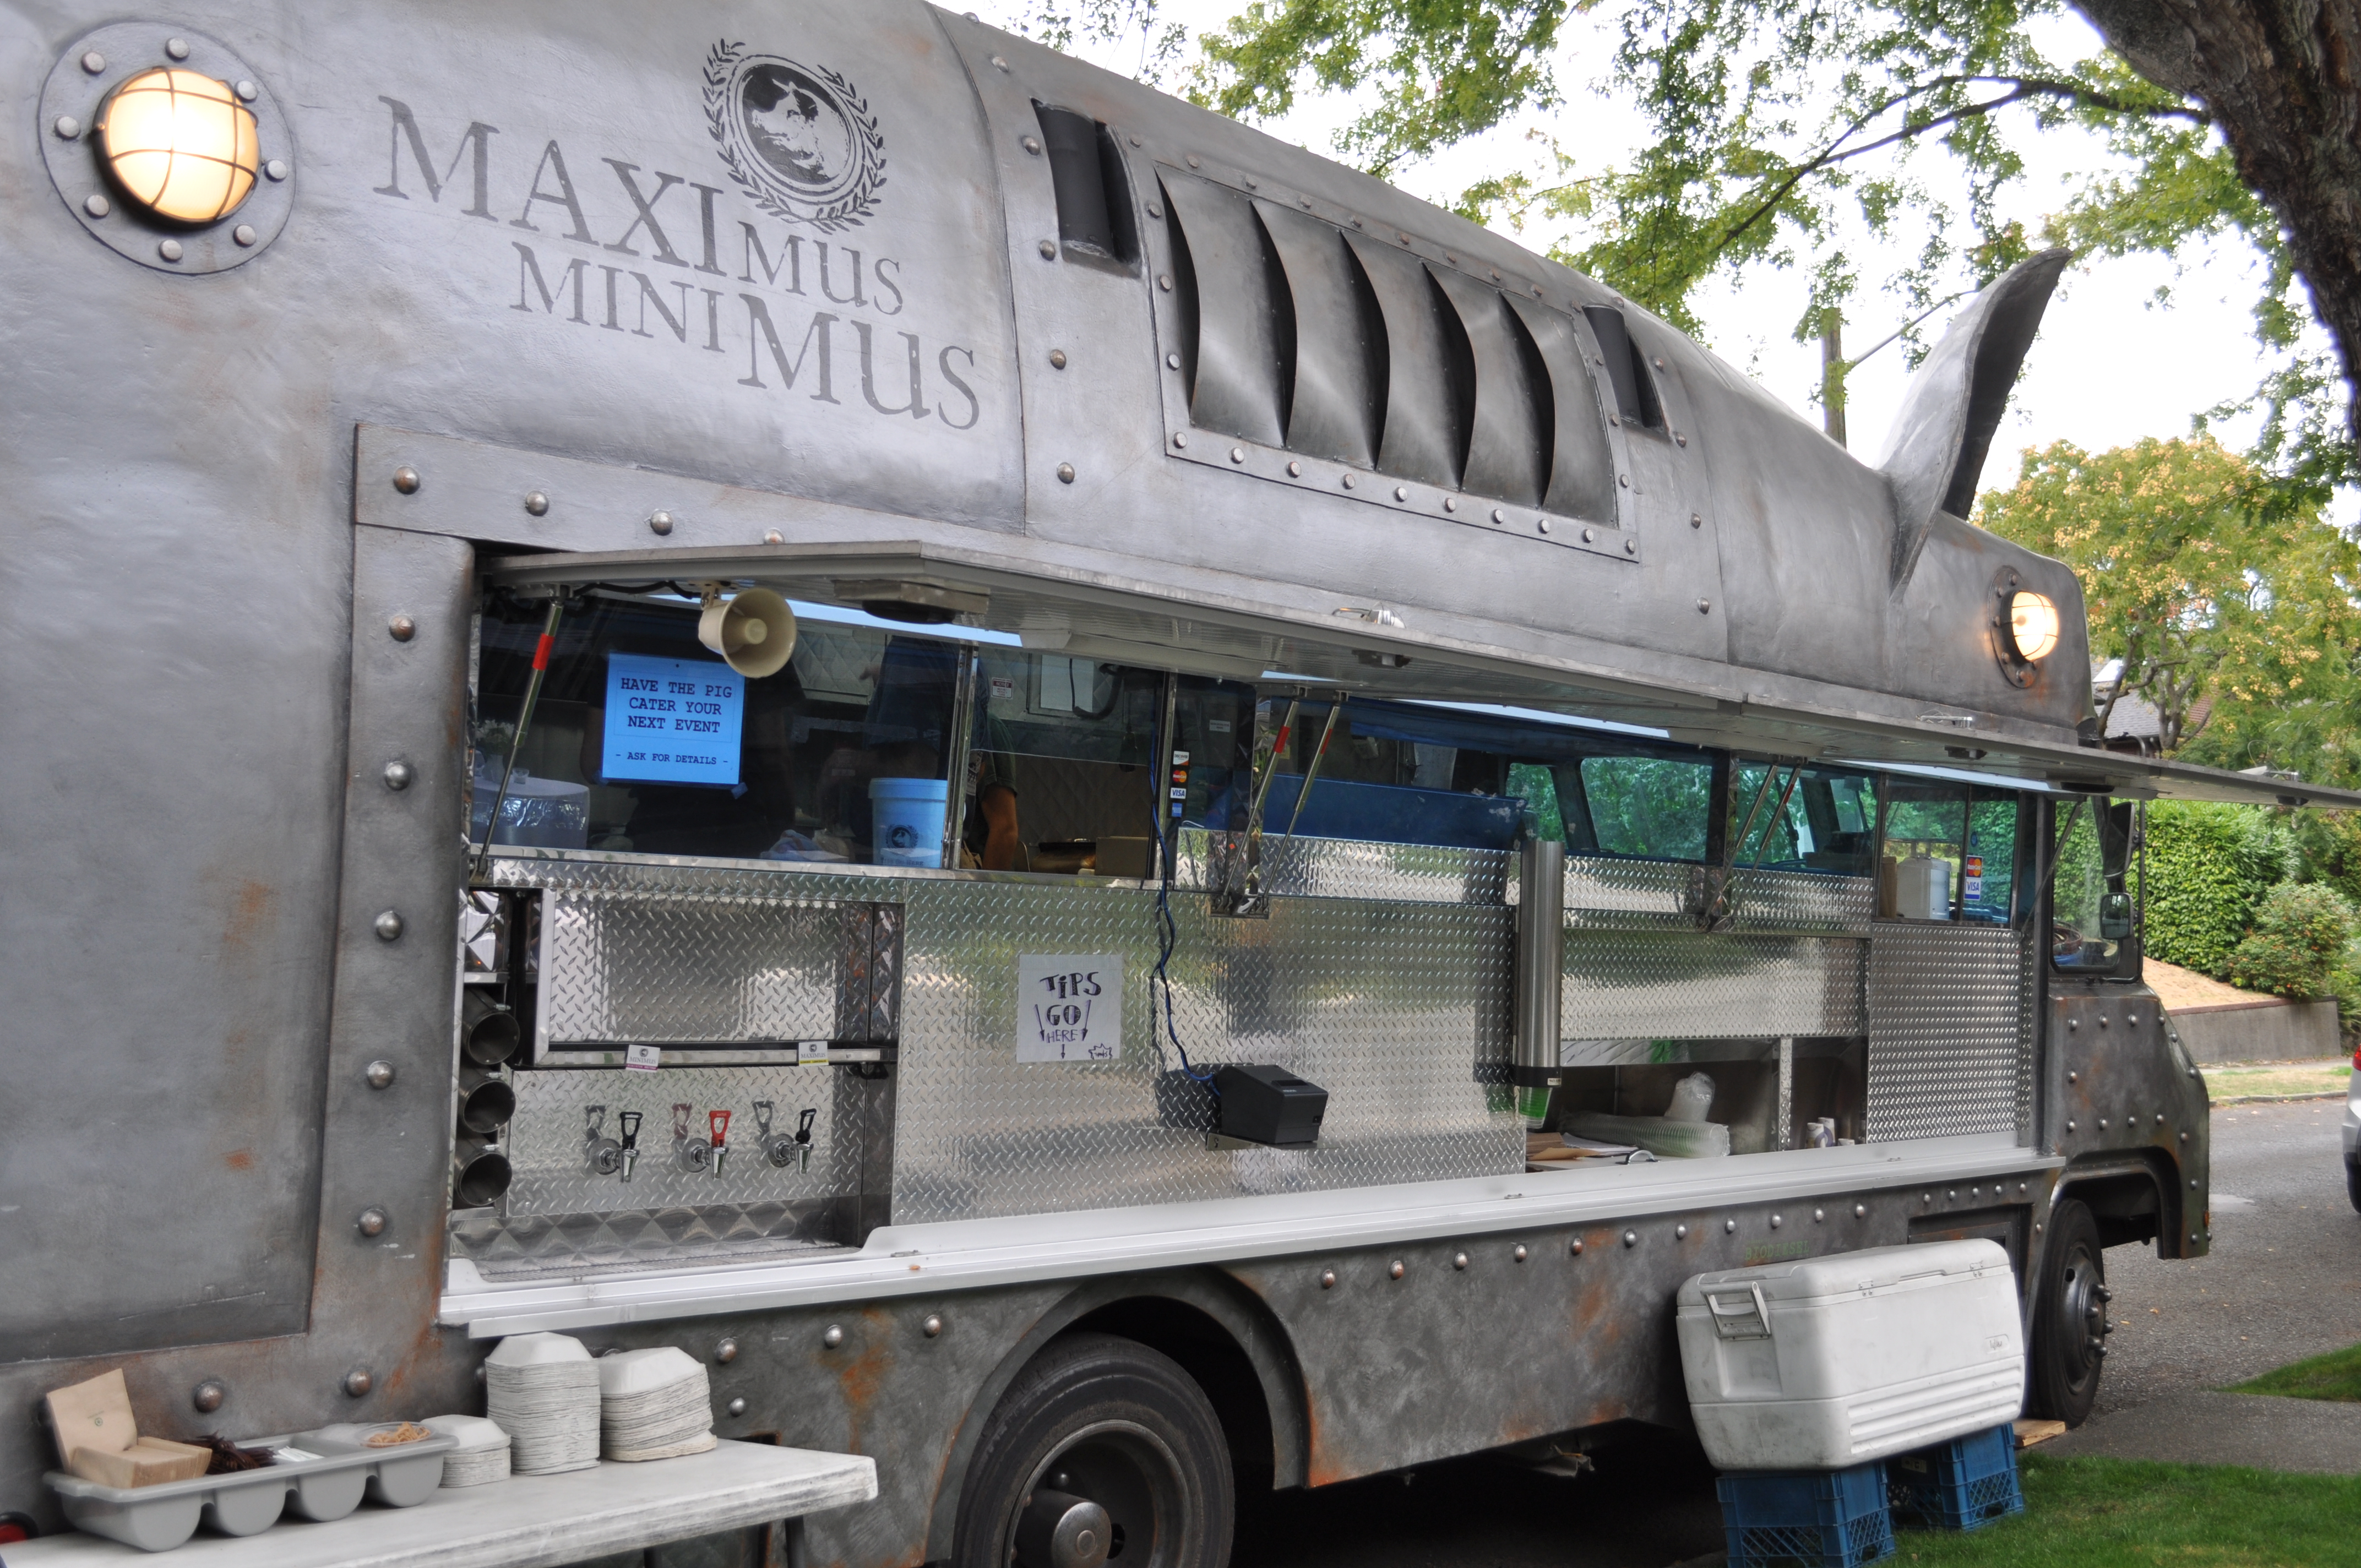 Unknown Catering Truck Photo Gallery: Photo #06 out of 6, Image ...